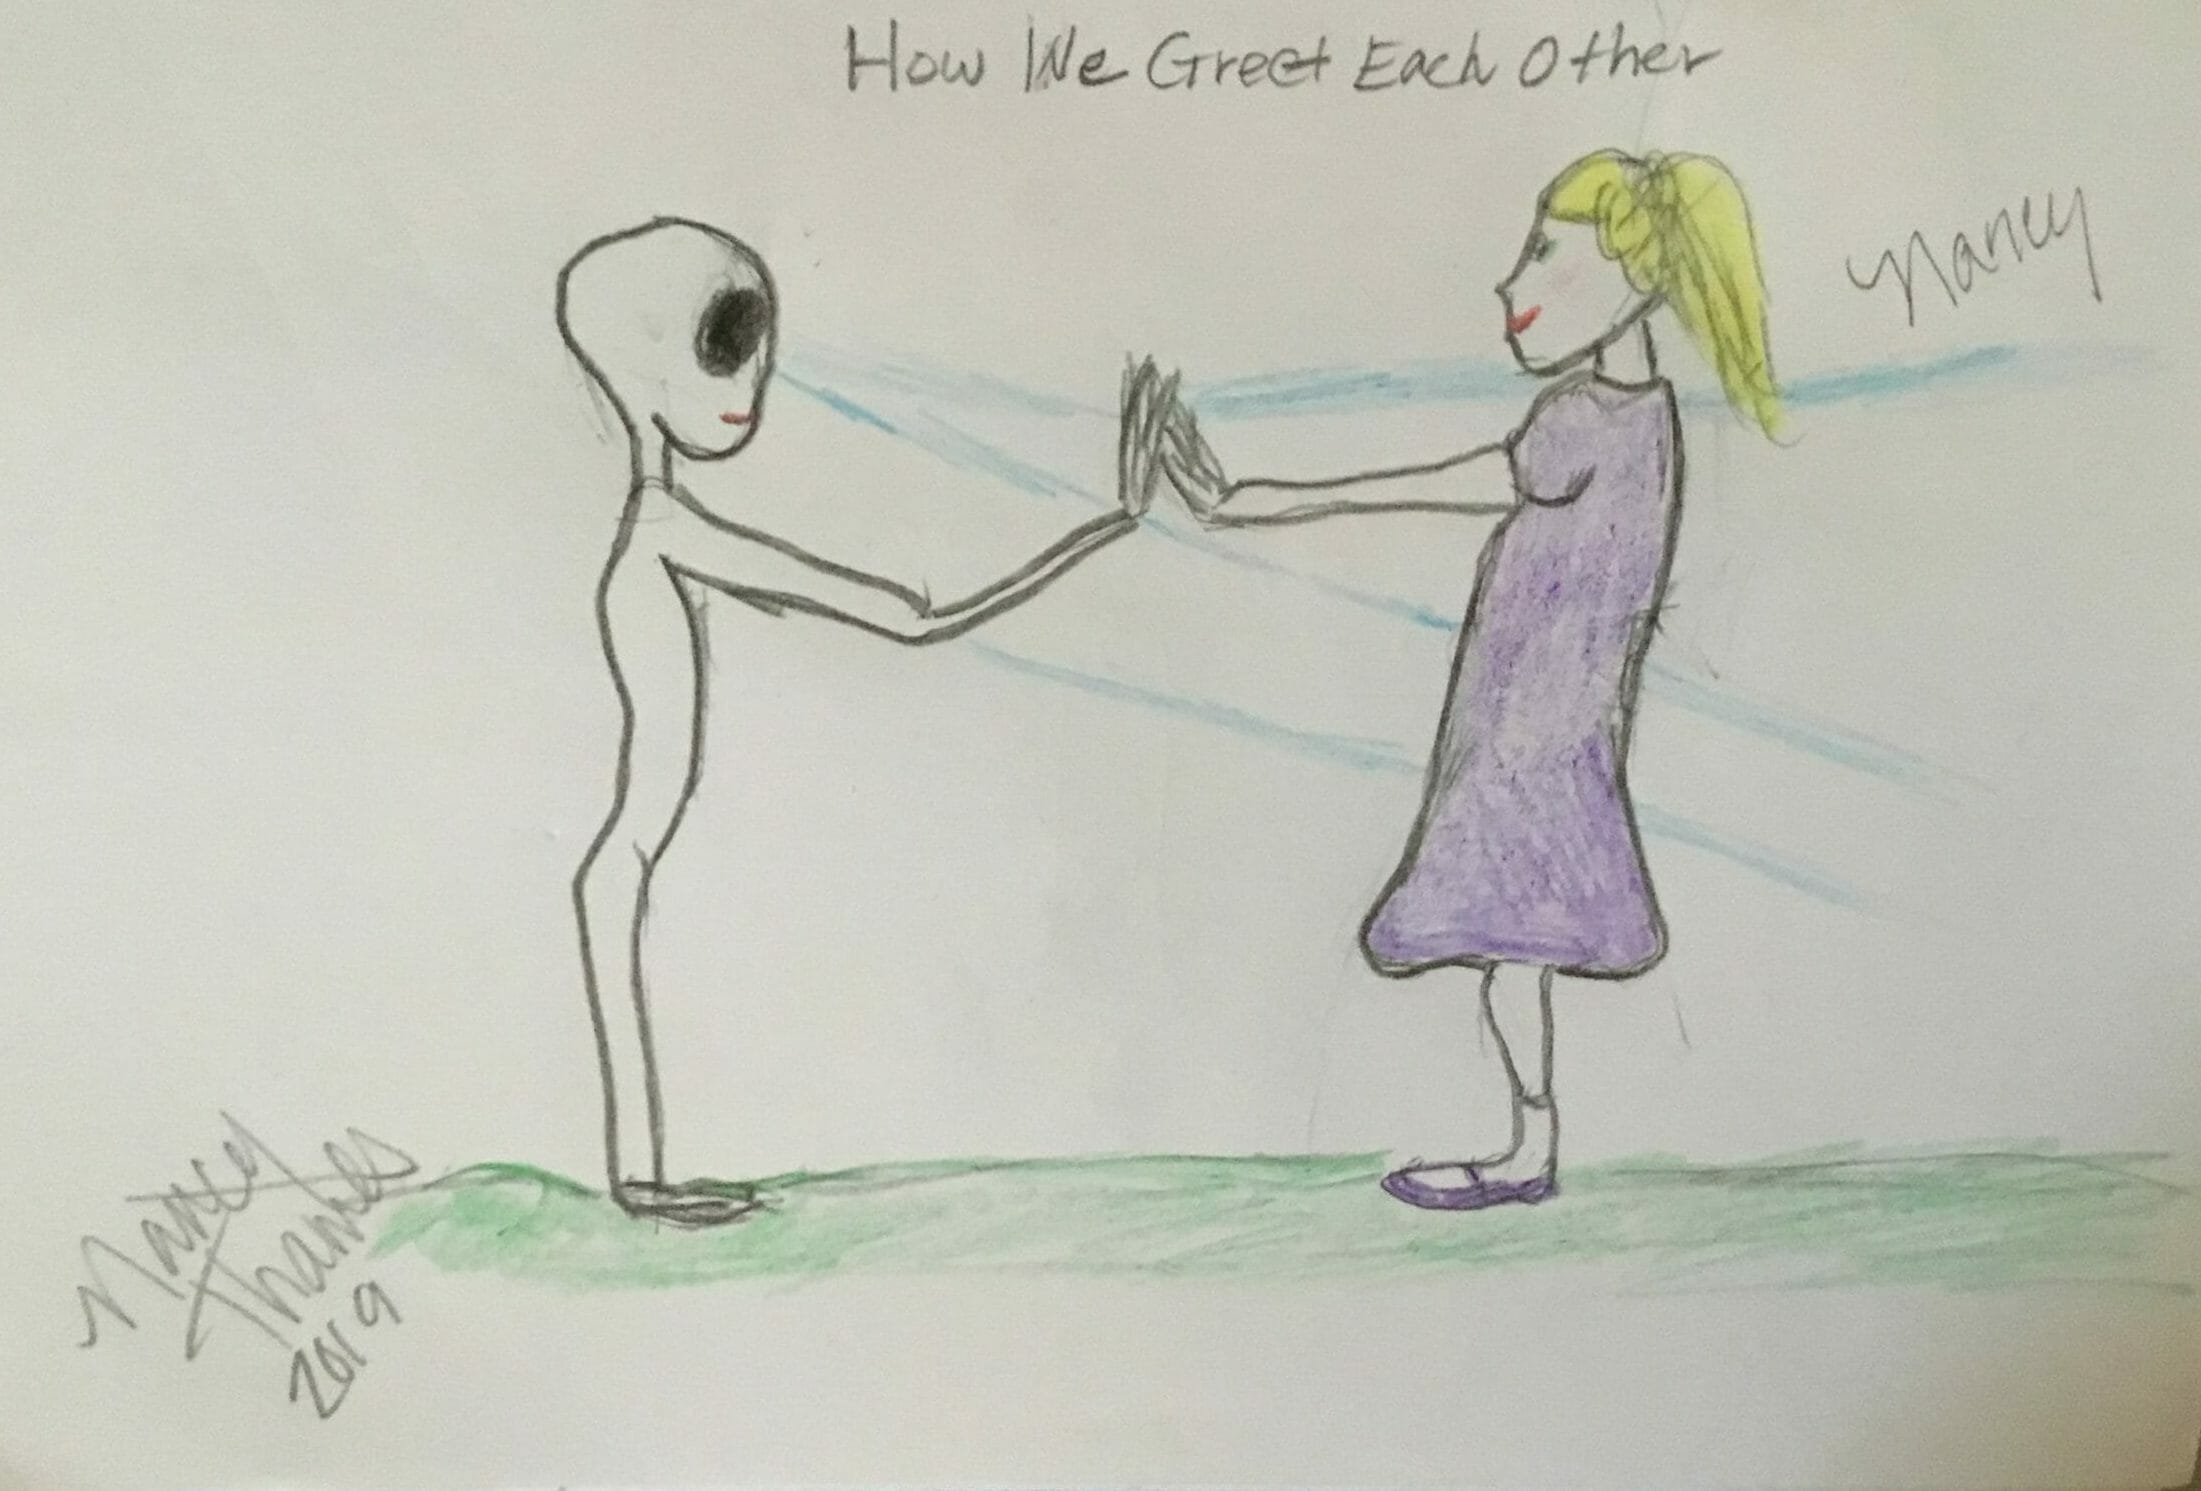 Greeting a Grey extraterrestrial